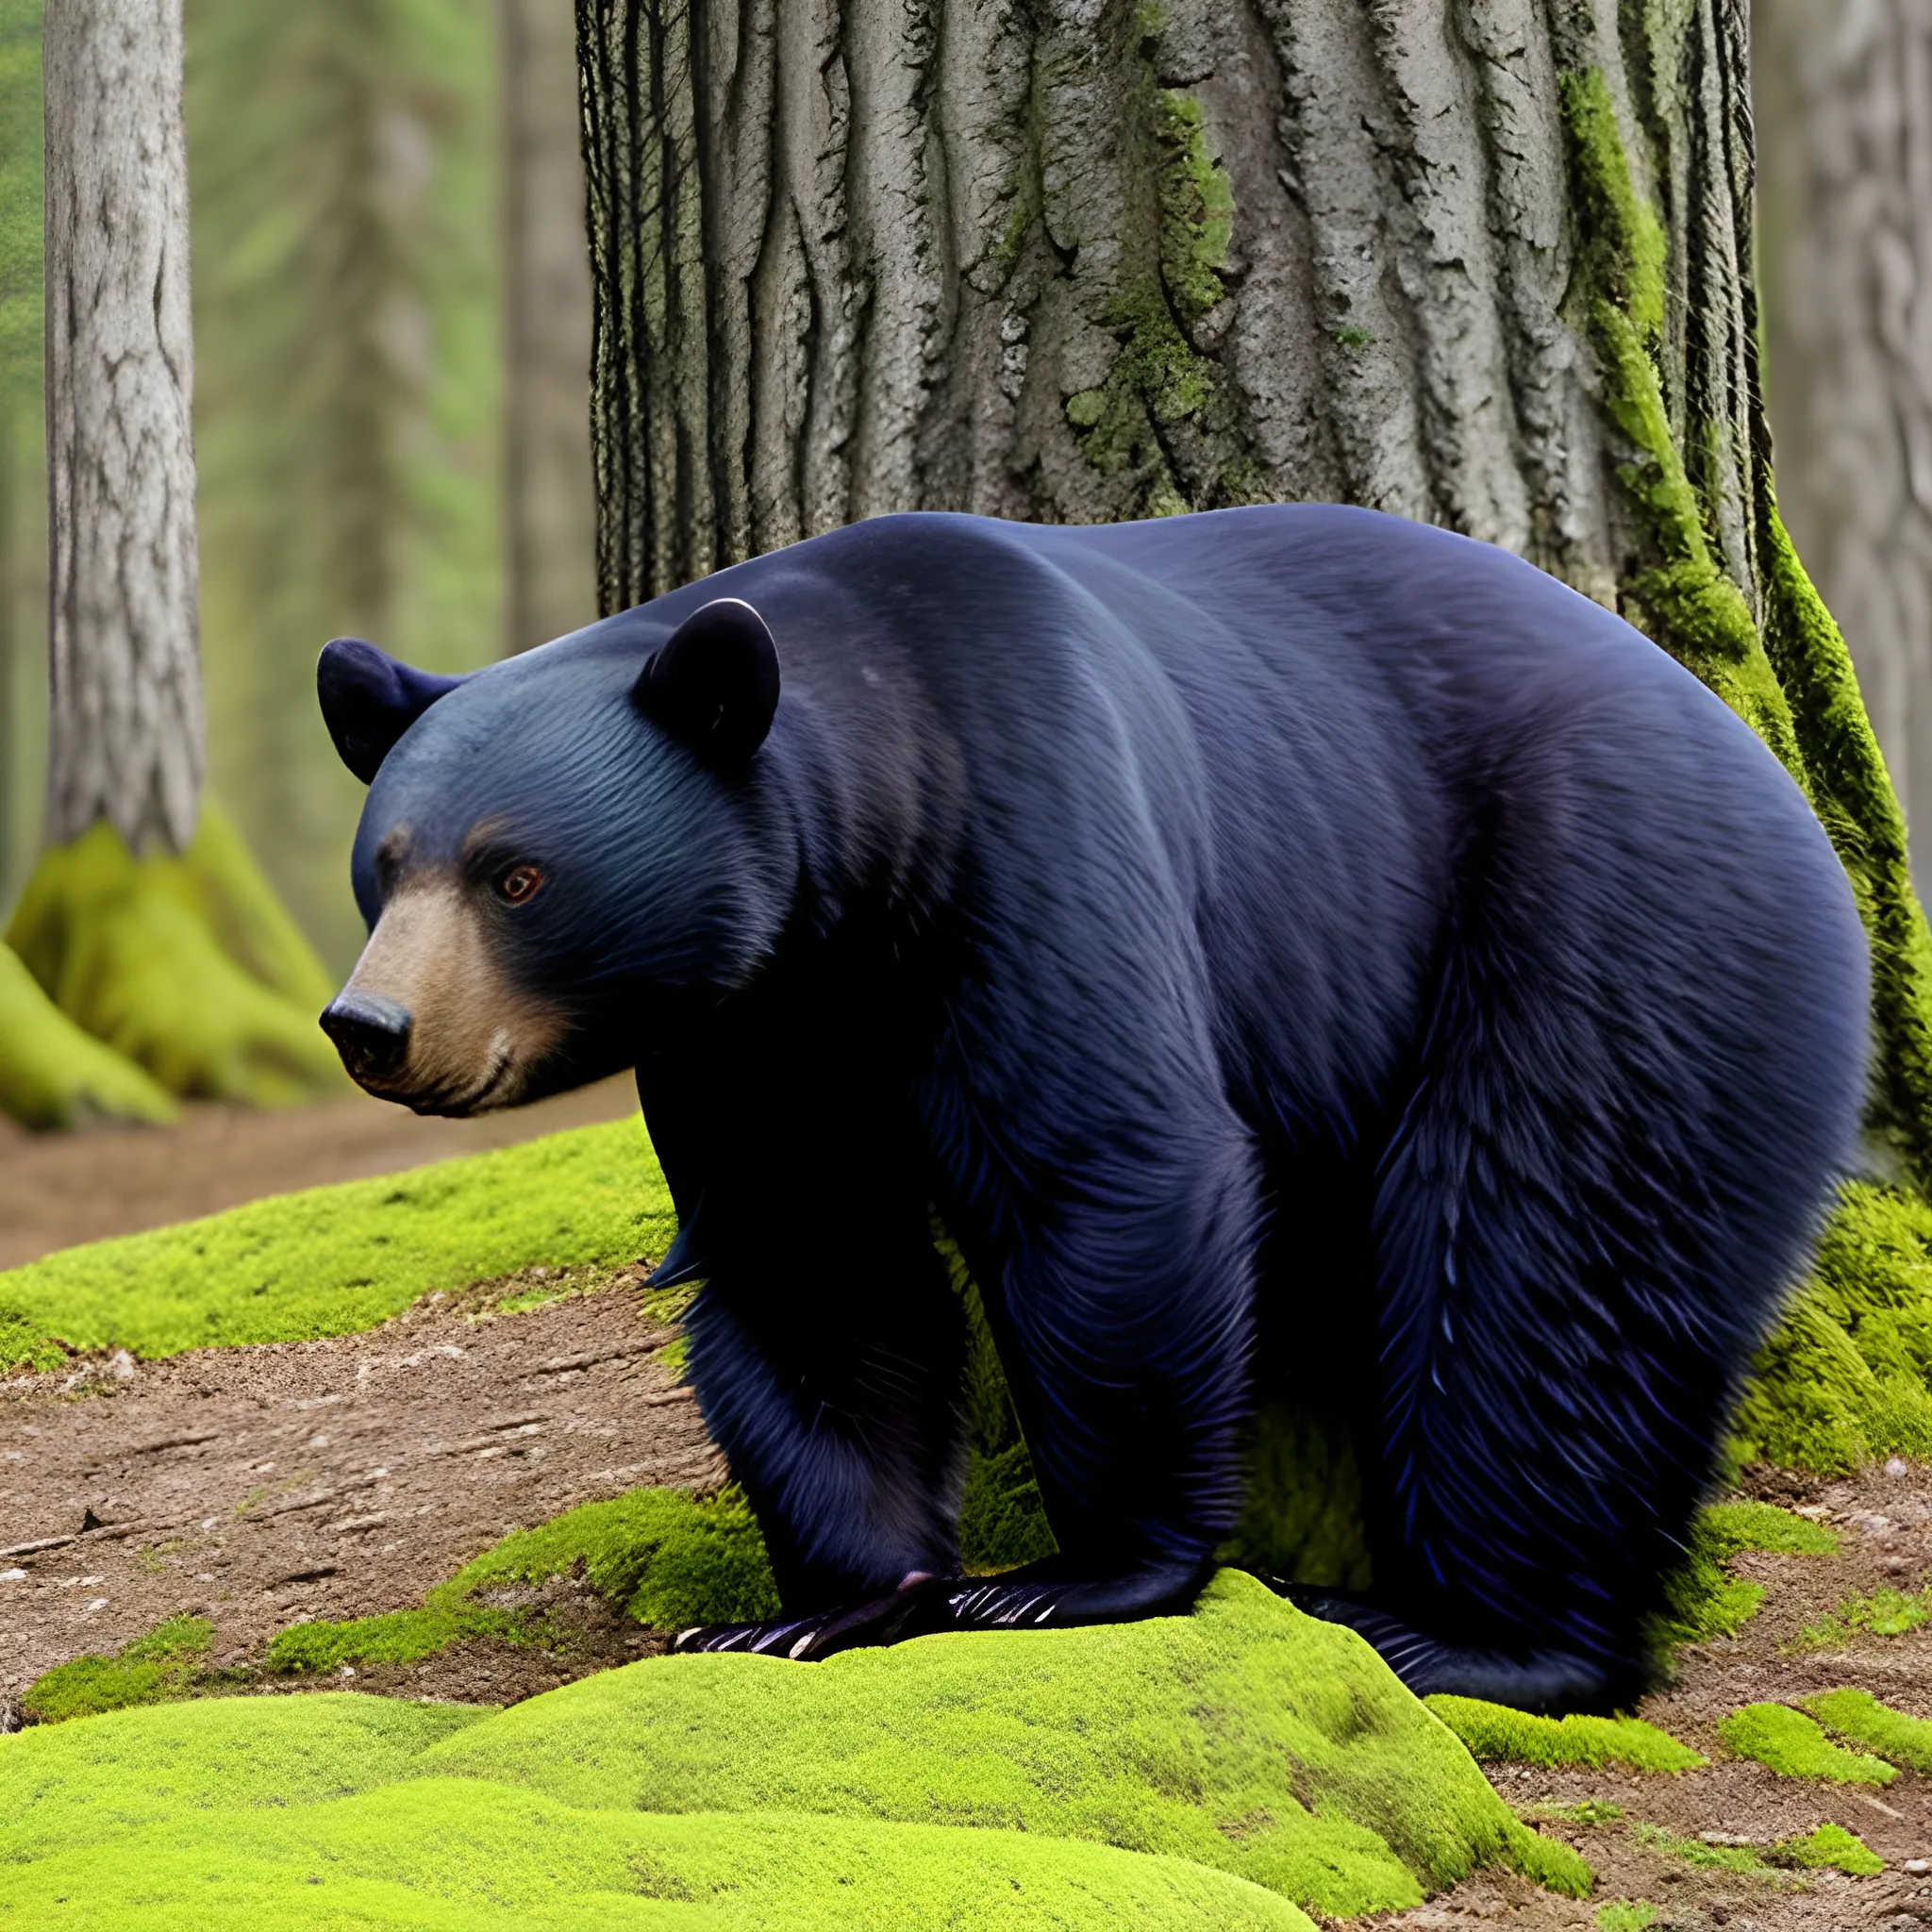 Appearance: The black bear is a large mammal with a sturdy build ...